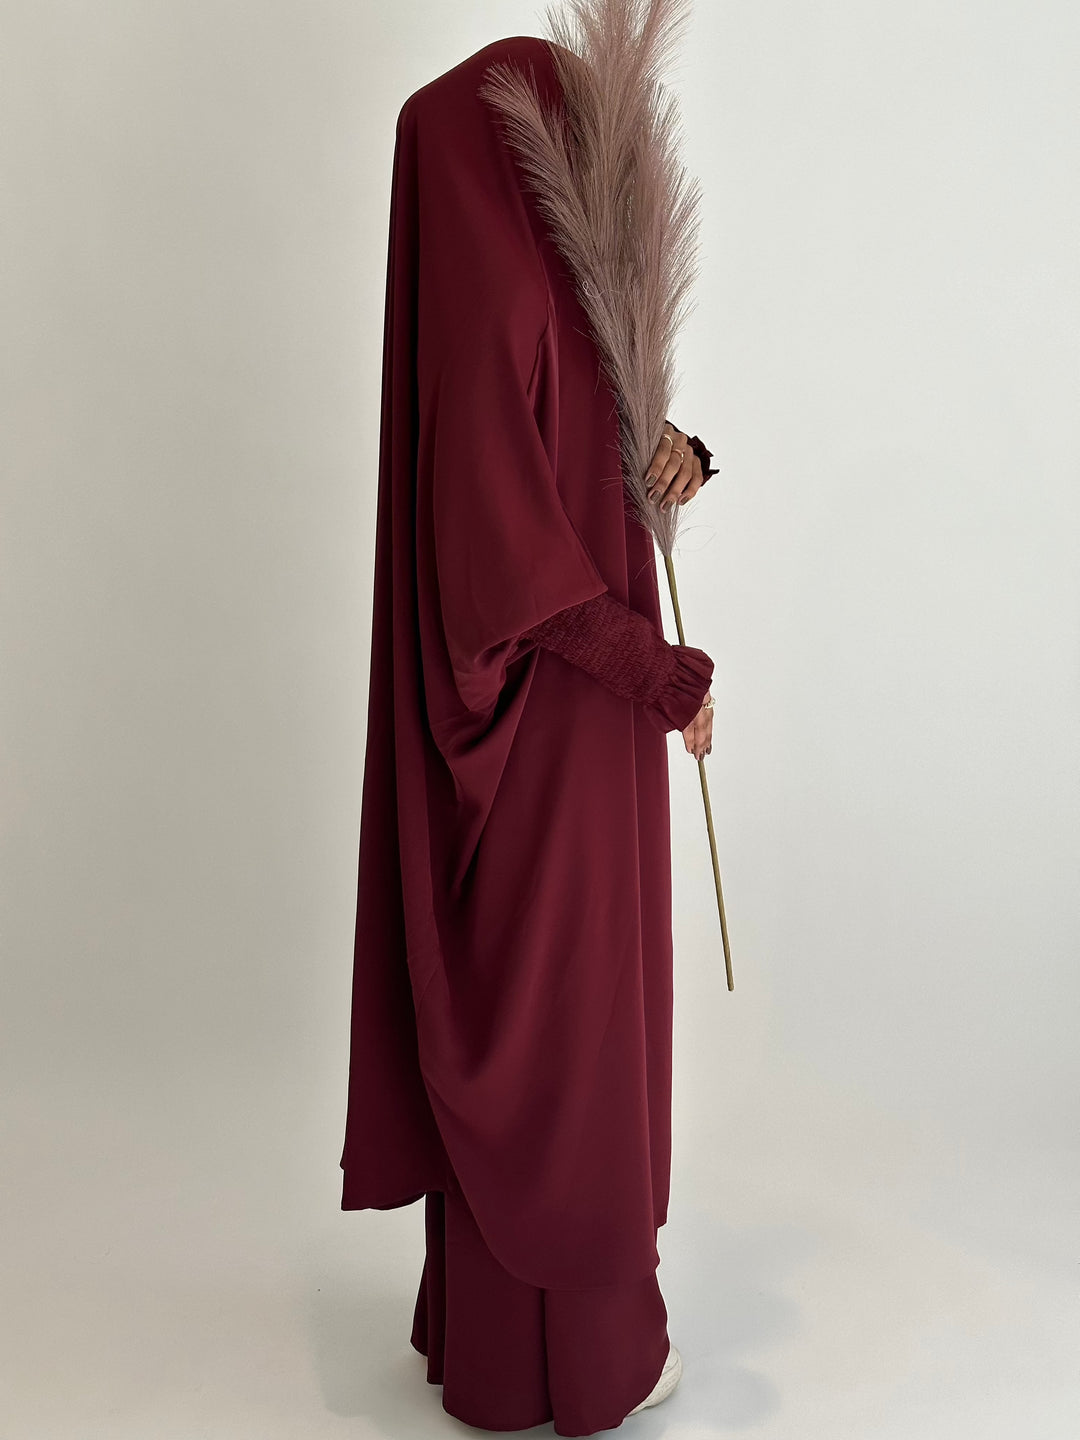 Get trendy with Medina 2-piece Jilbab - Wine -  available at Voilee NY. Grab yours for $34.90 today!